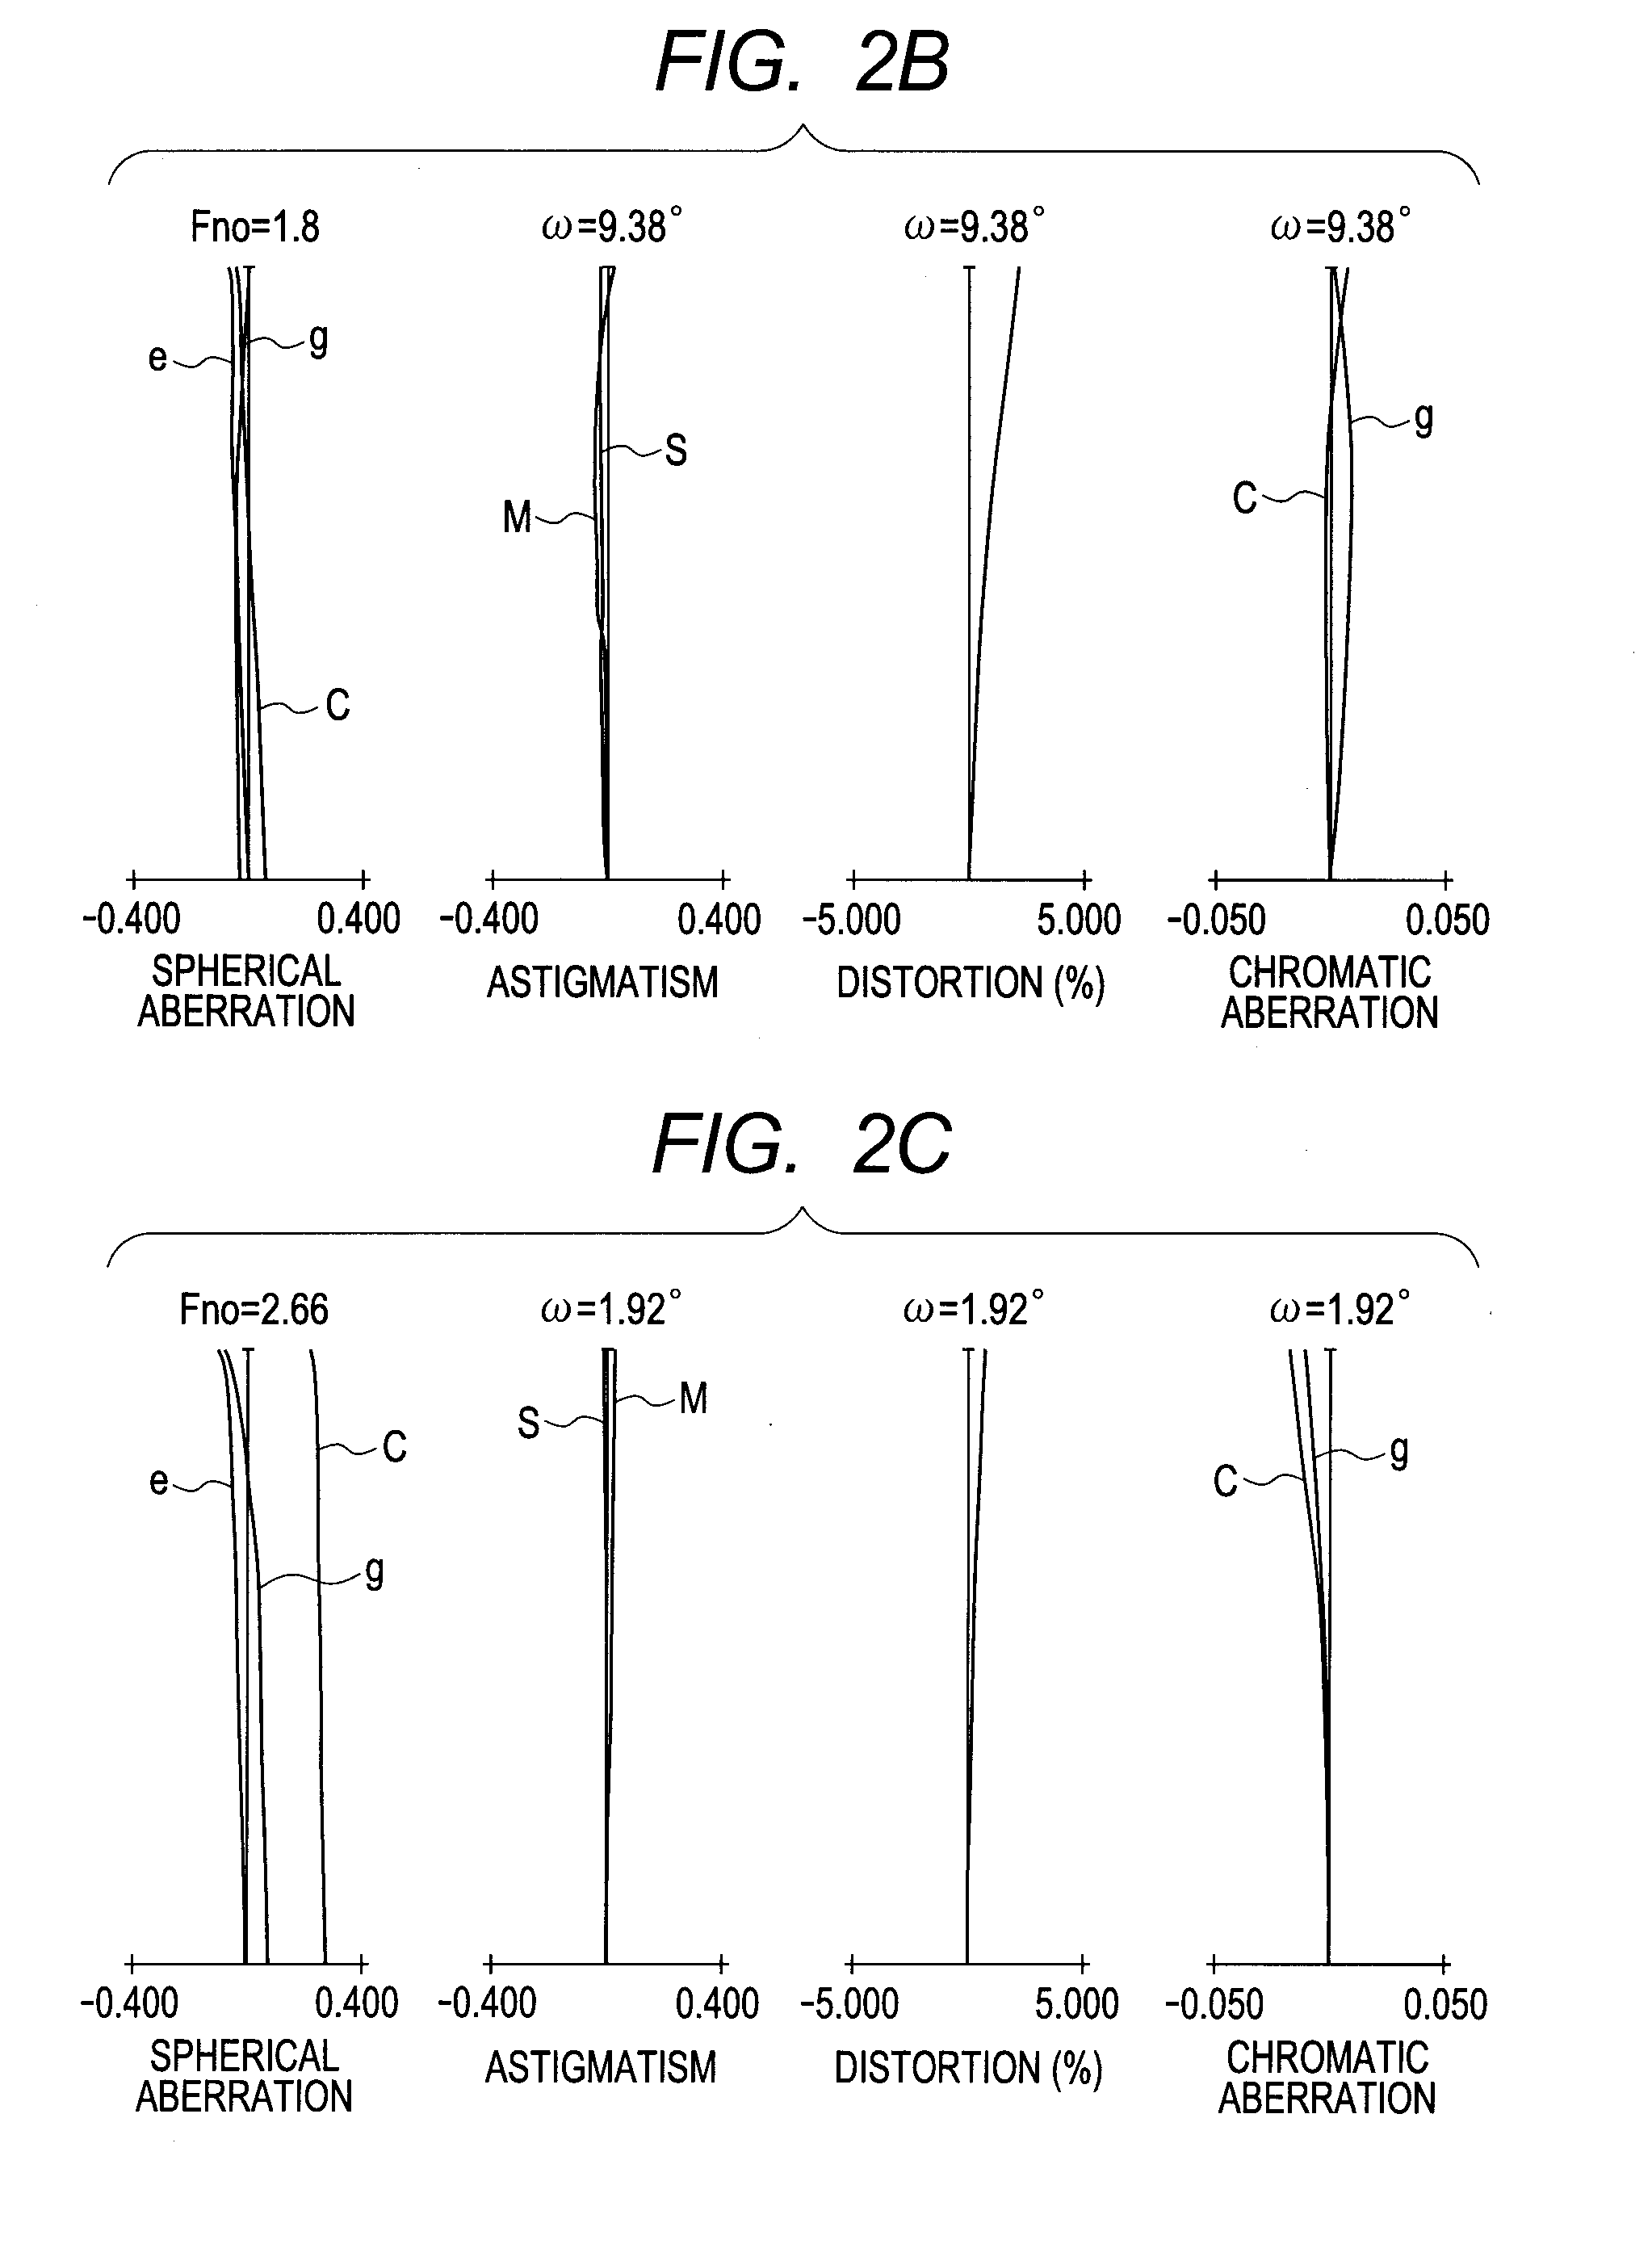 Zoom lens and image pickup apparatus having the same